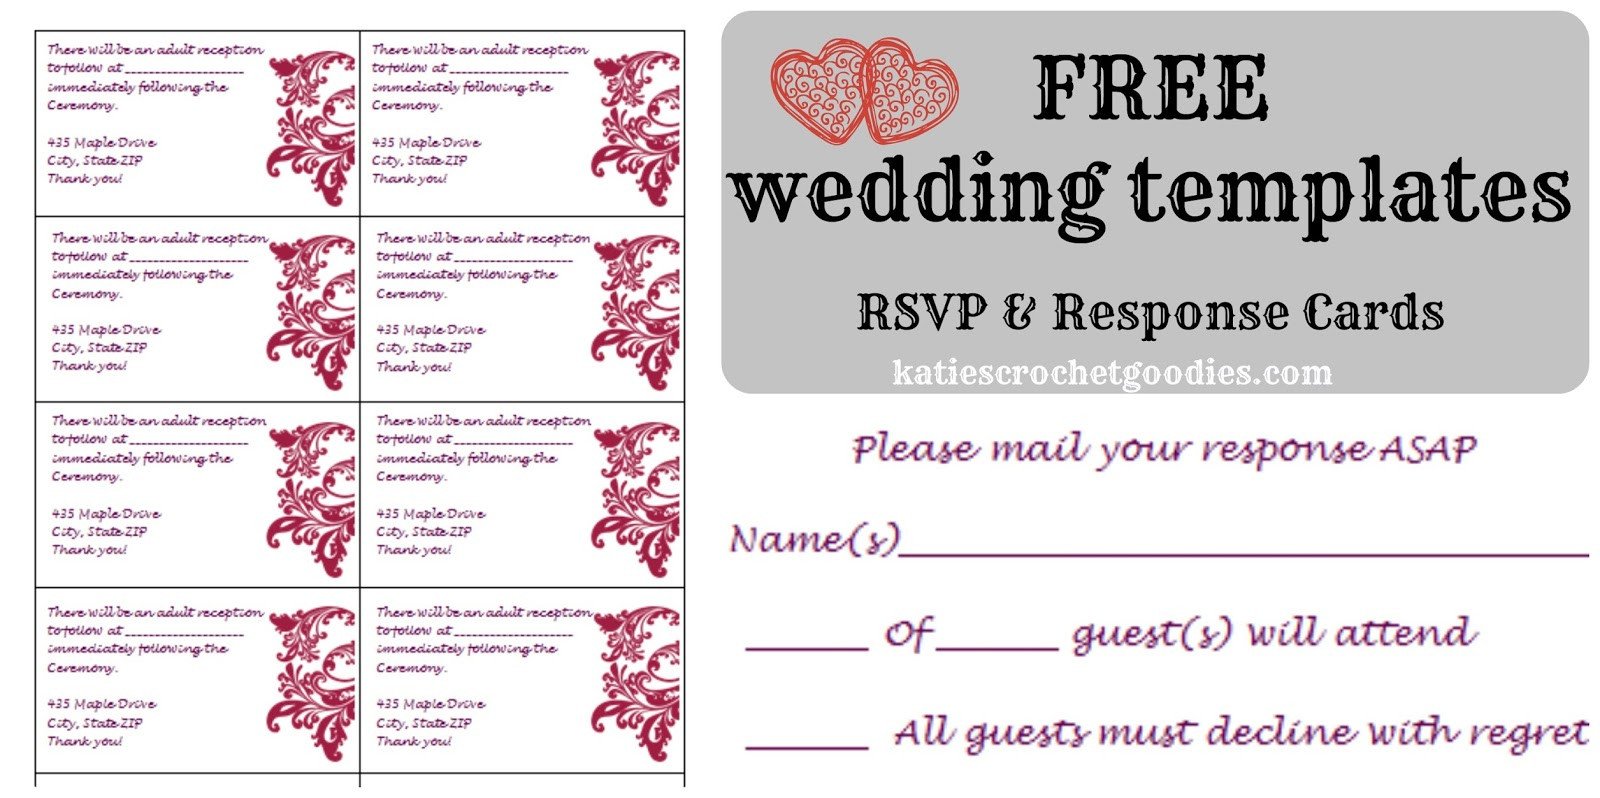 Wedding Card Template Free Download Free Wedding Templates Rsvp & Reception Cards Katie S